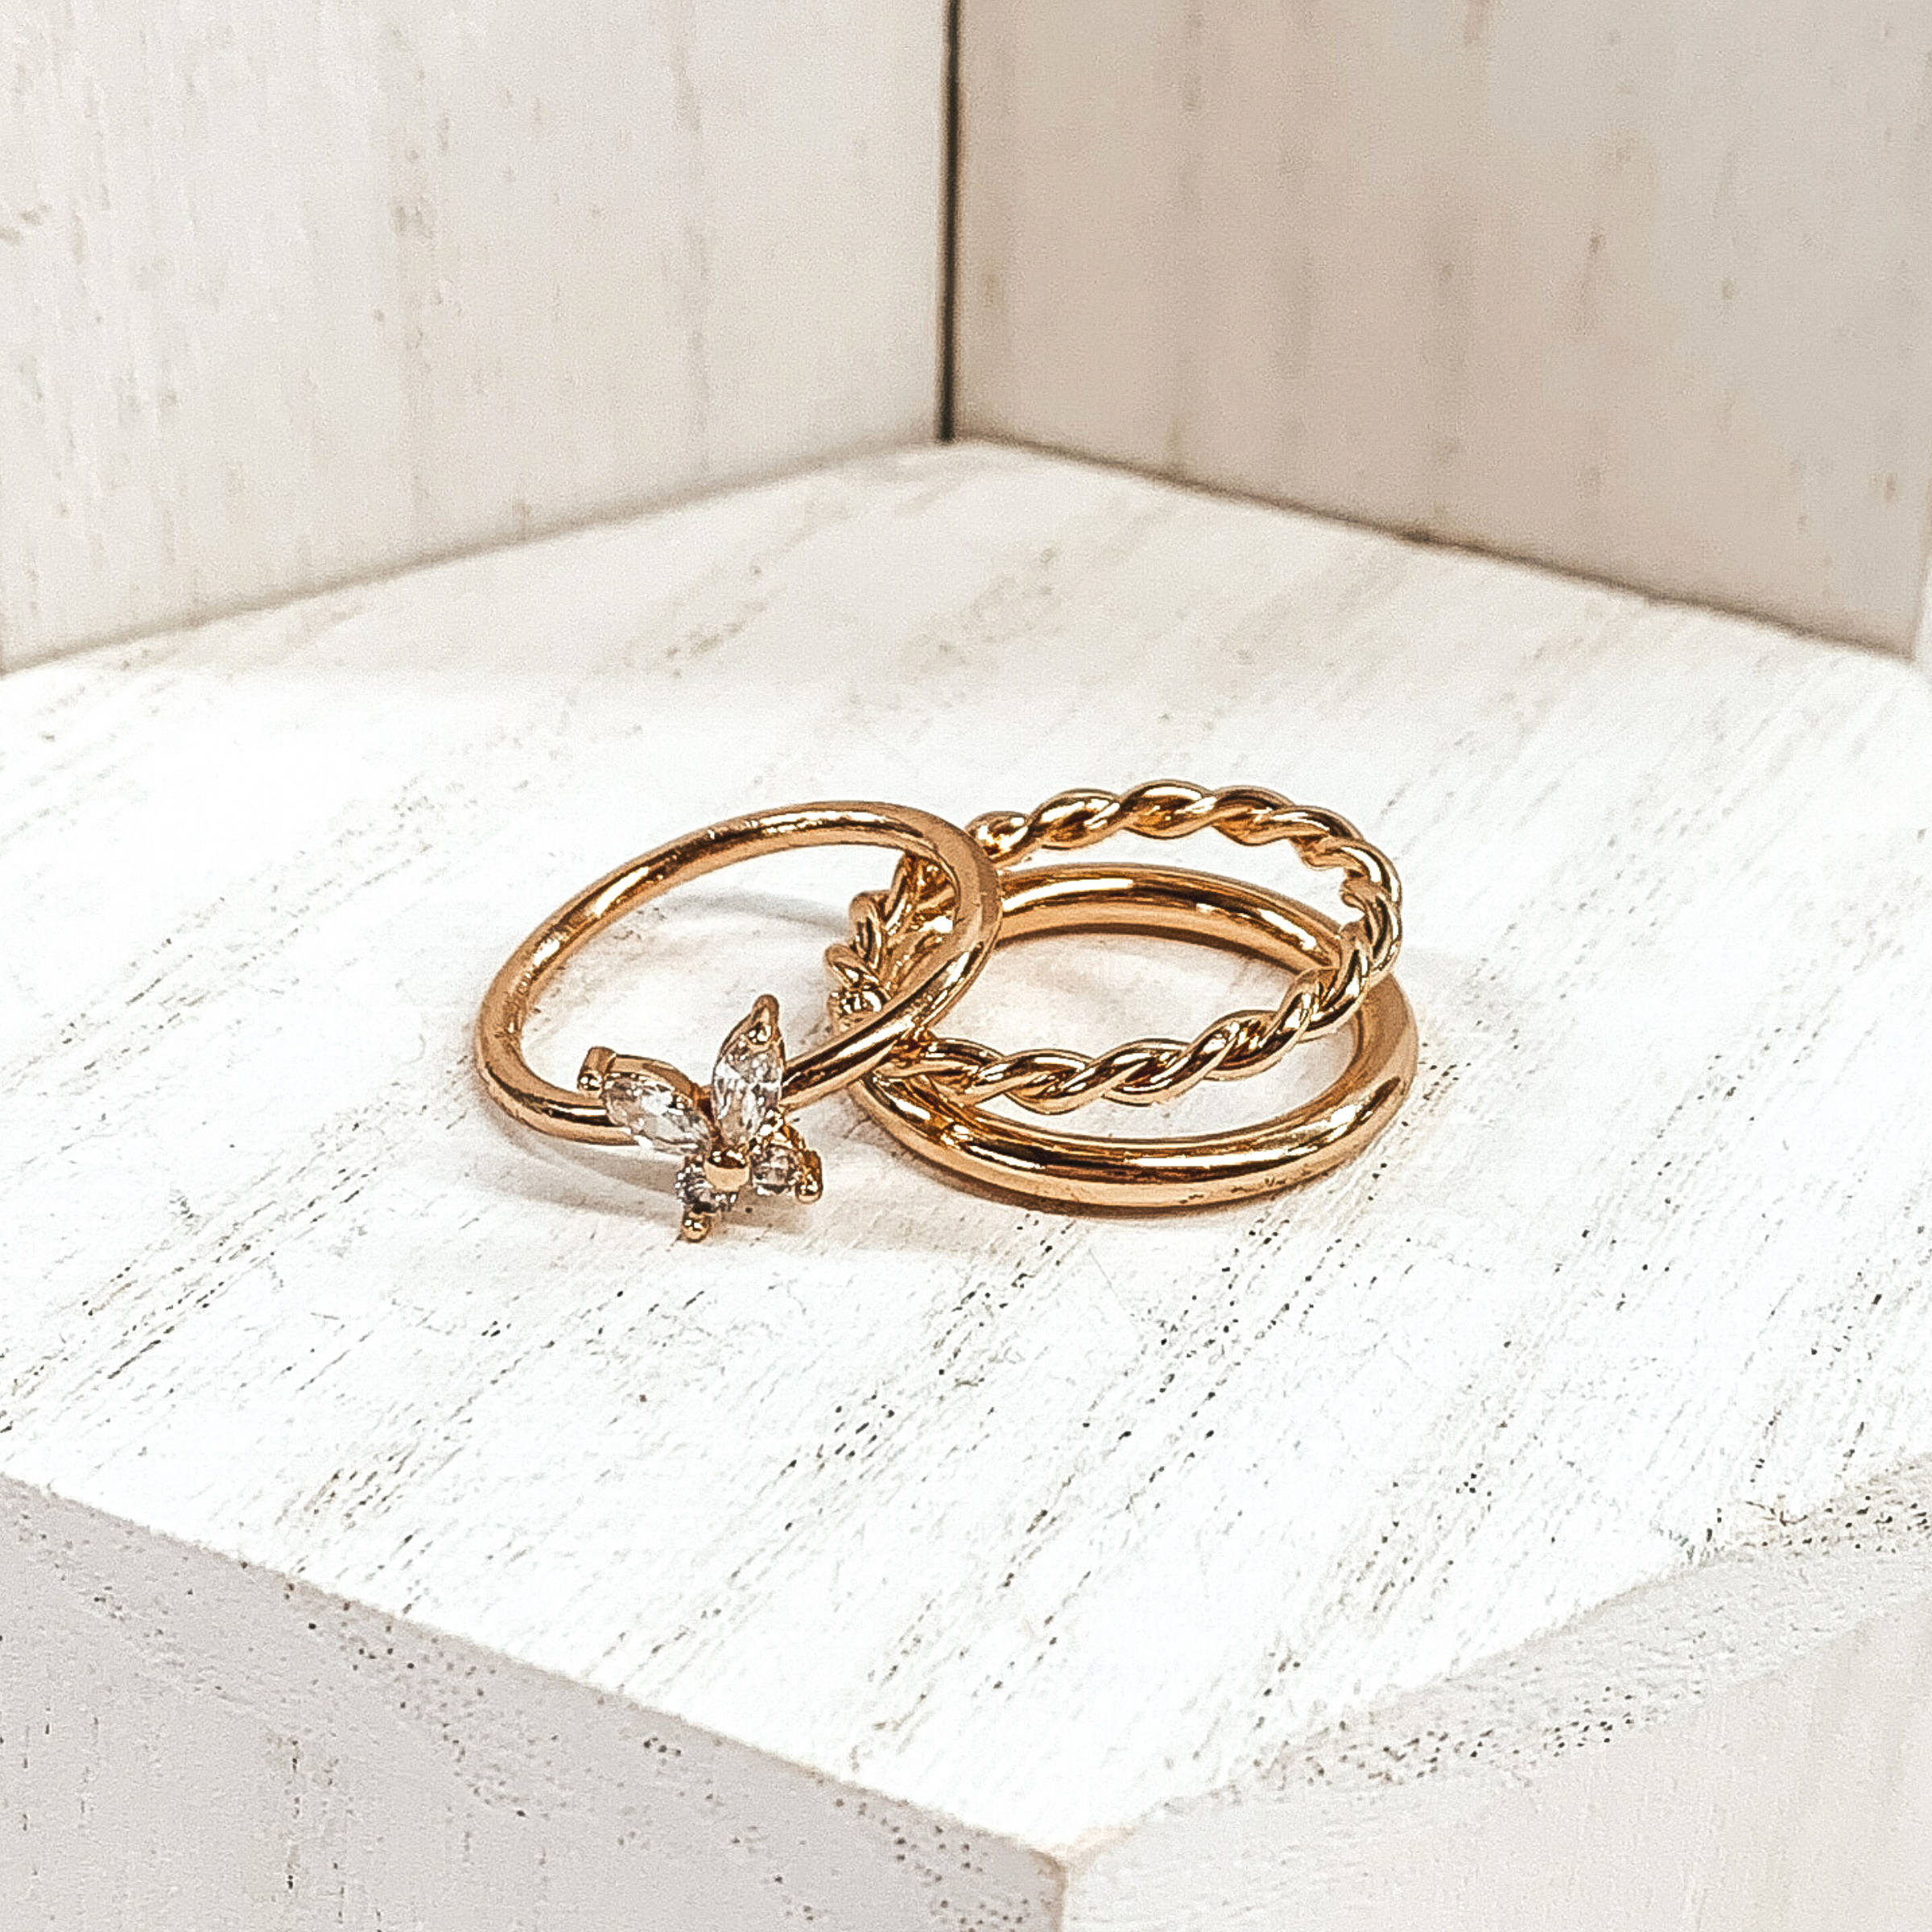 Both rings are gold in color. The double ring has one plain band and one twisted band. The ring that is leaning on it has a clear crystal butterfly pendant with a plain band. These rings are pictured on a white background.